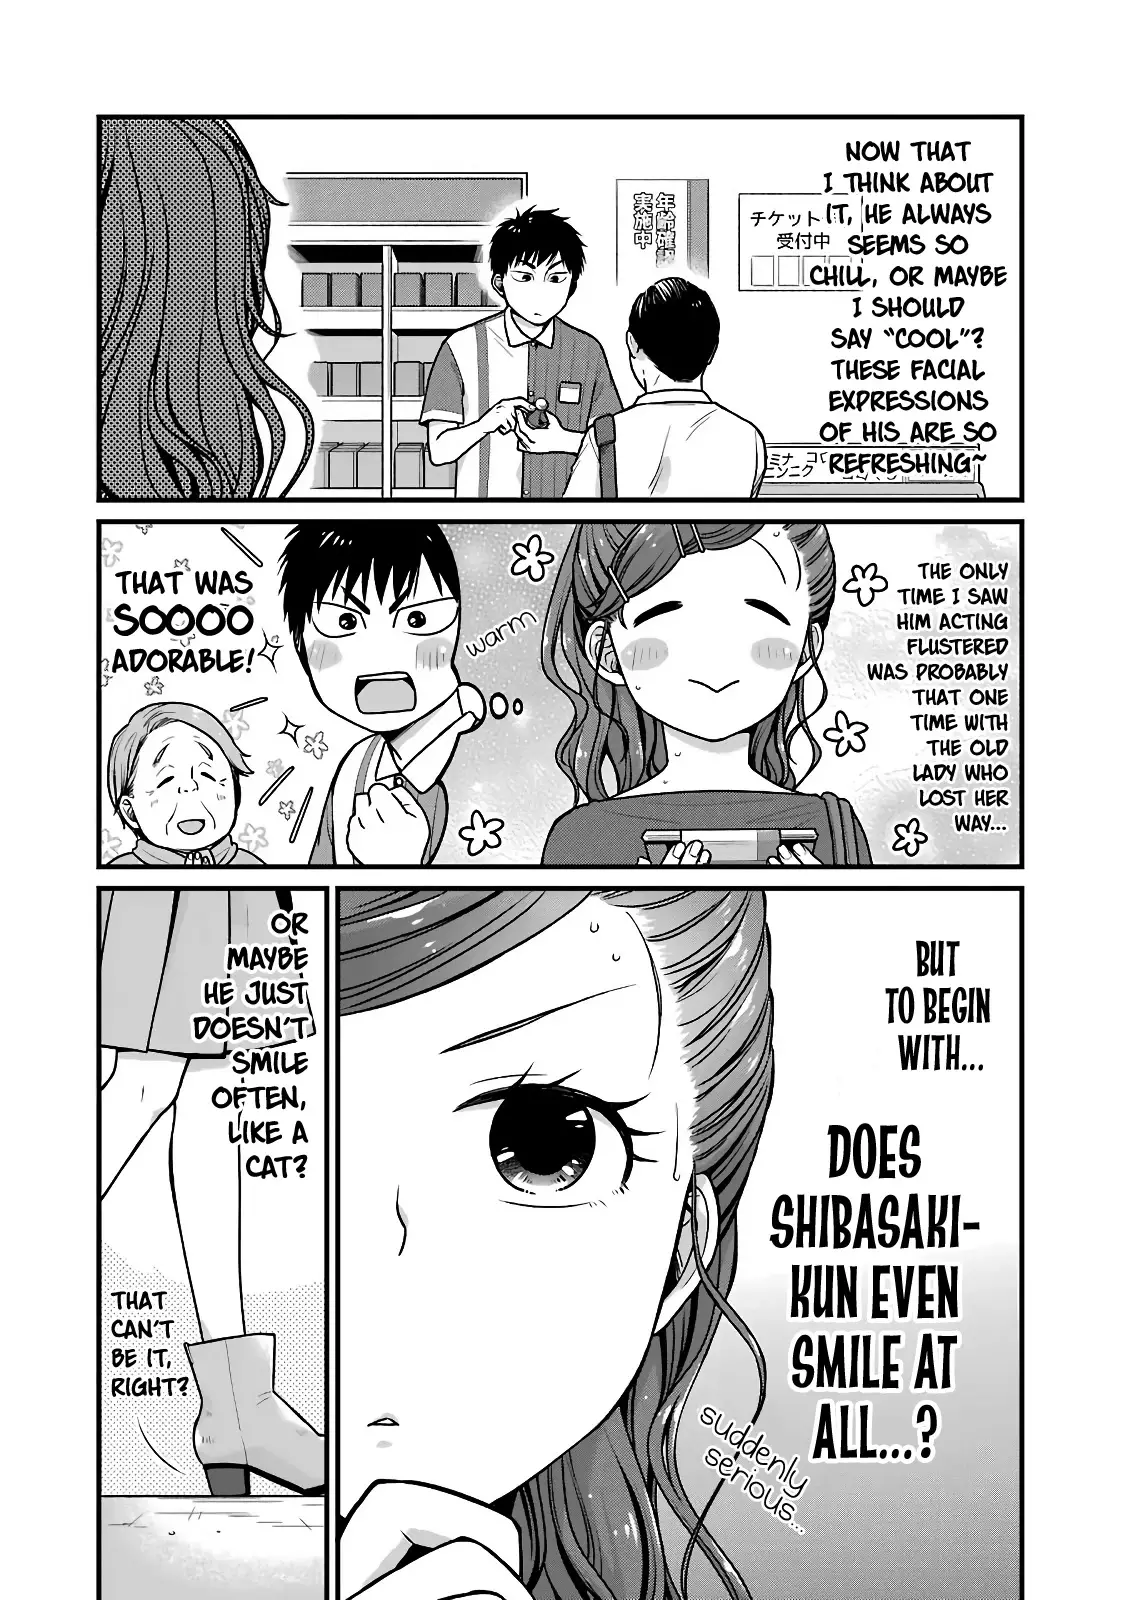 5 Minutes With You At A Convenience Store - 27 page 2